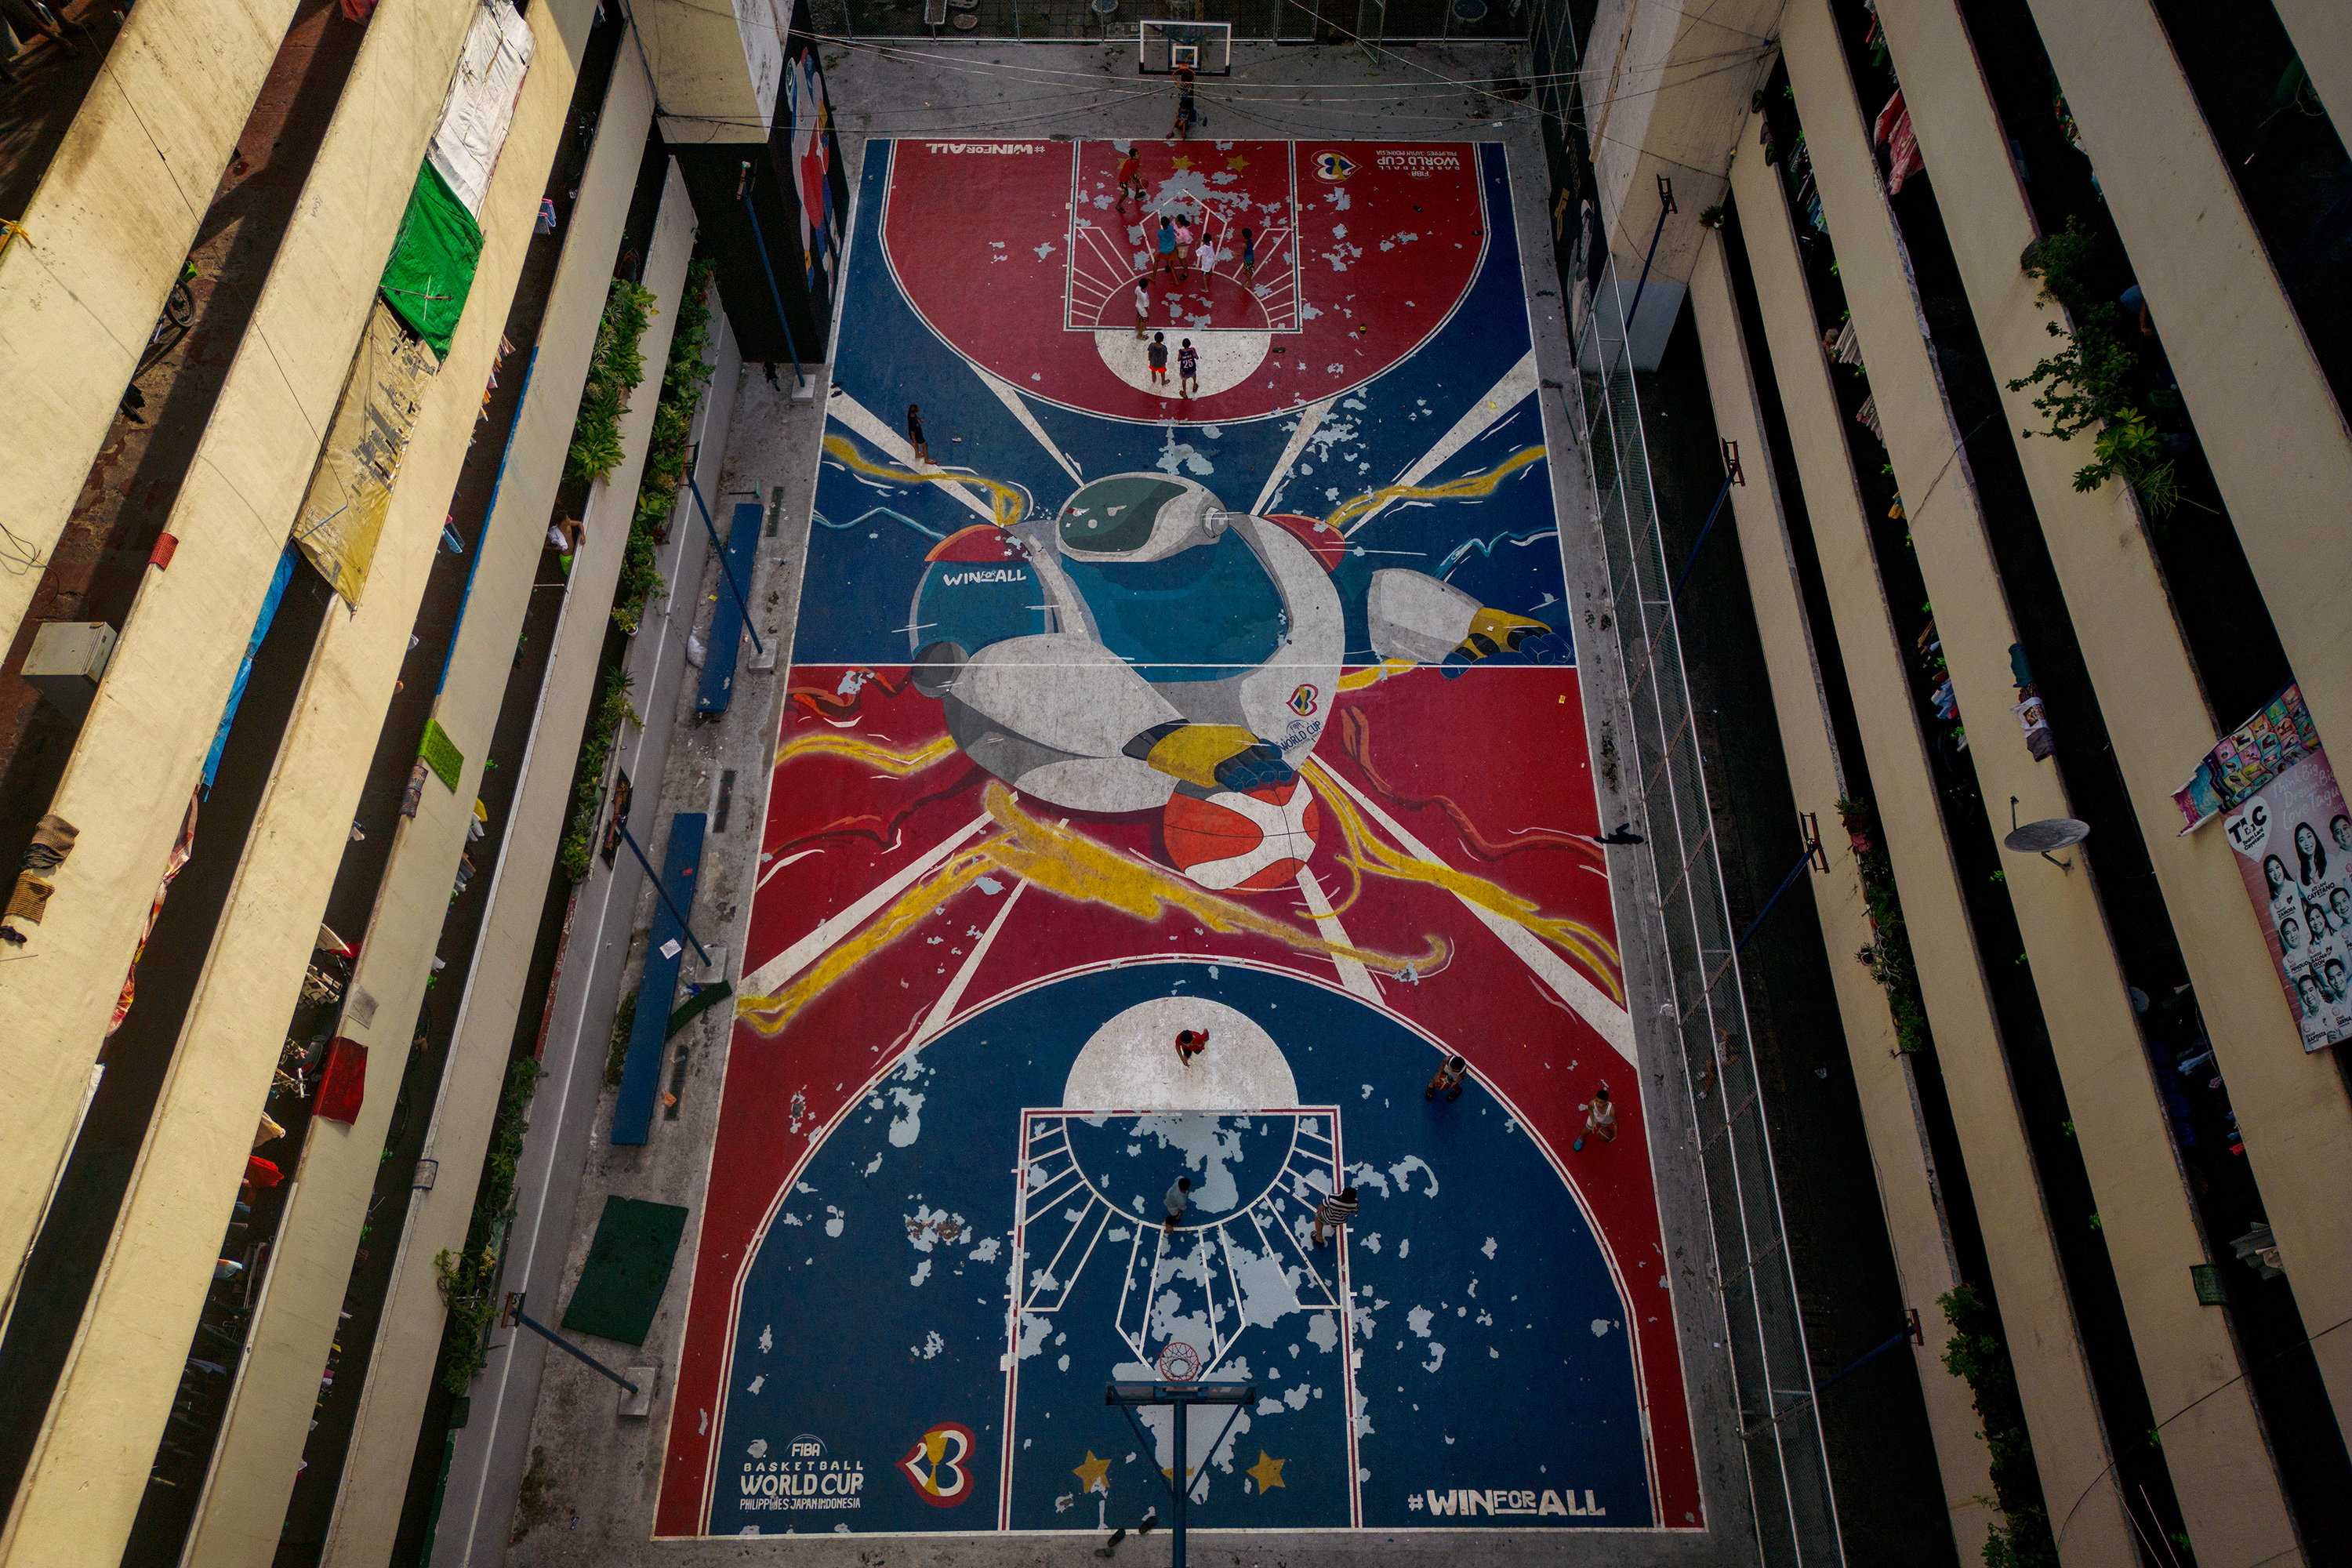 mural of JIP, the FIBA World Cup mascot, is seen painted on a basketball court at a tenement building ahead of the FIBA World Cup on August 22, 2023 in Taguig, Metro Manila, Philippines.